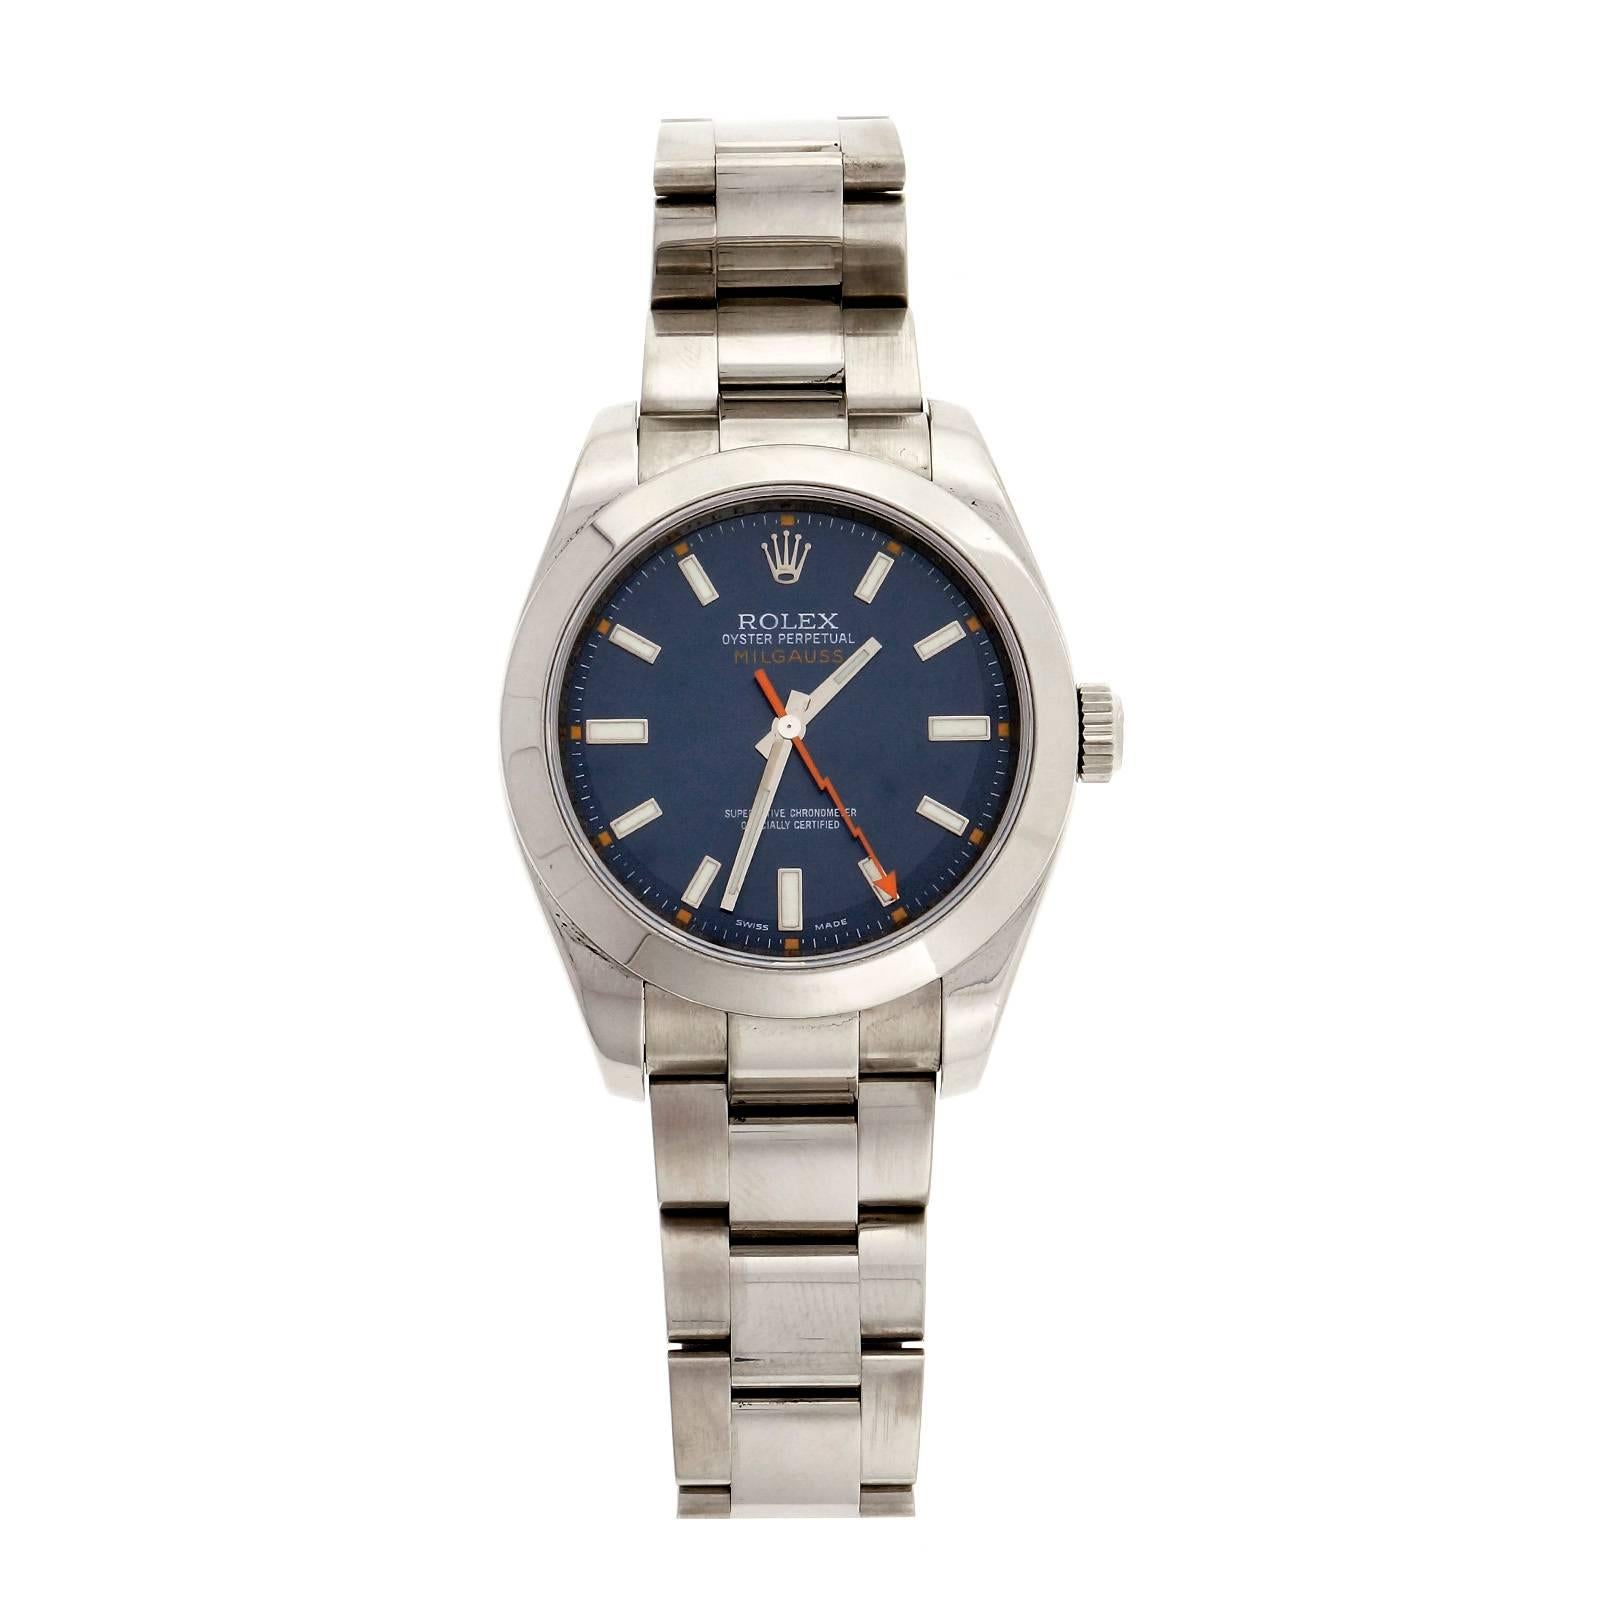 2009 Rolex steel Milgauss 116400. Hard to find blue face, clear crystal.  Anti-magnetic shield.

Serial #M579298
Length: 8 inches
155.5 grams
Stainless steel
Length: 48.6mm
Width: 42mm
Band width at case: 20mm
Case thickness: 13mm
Band: